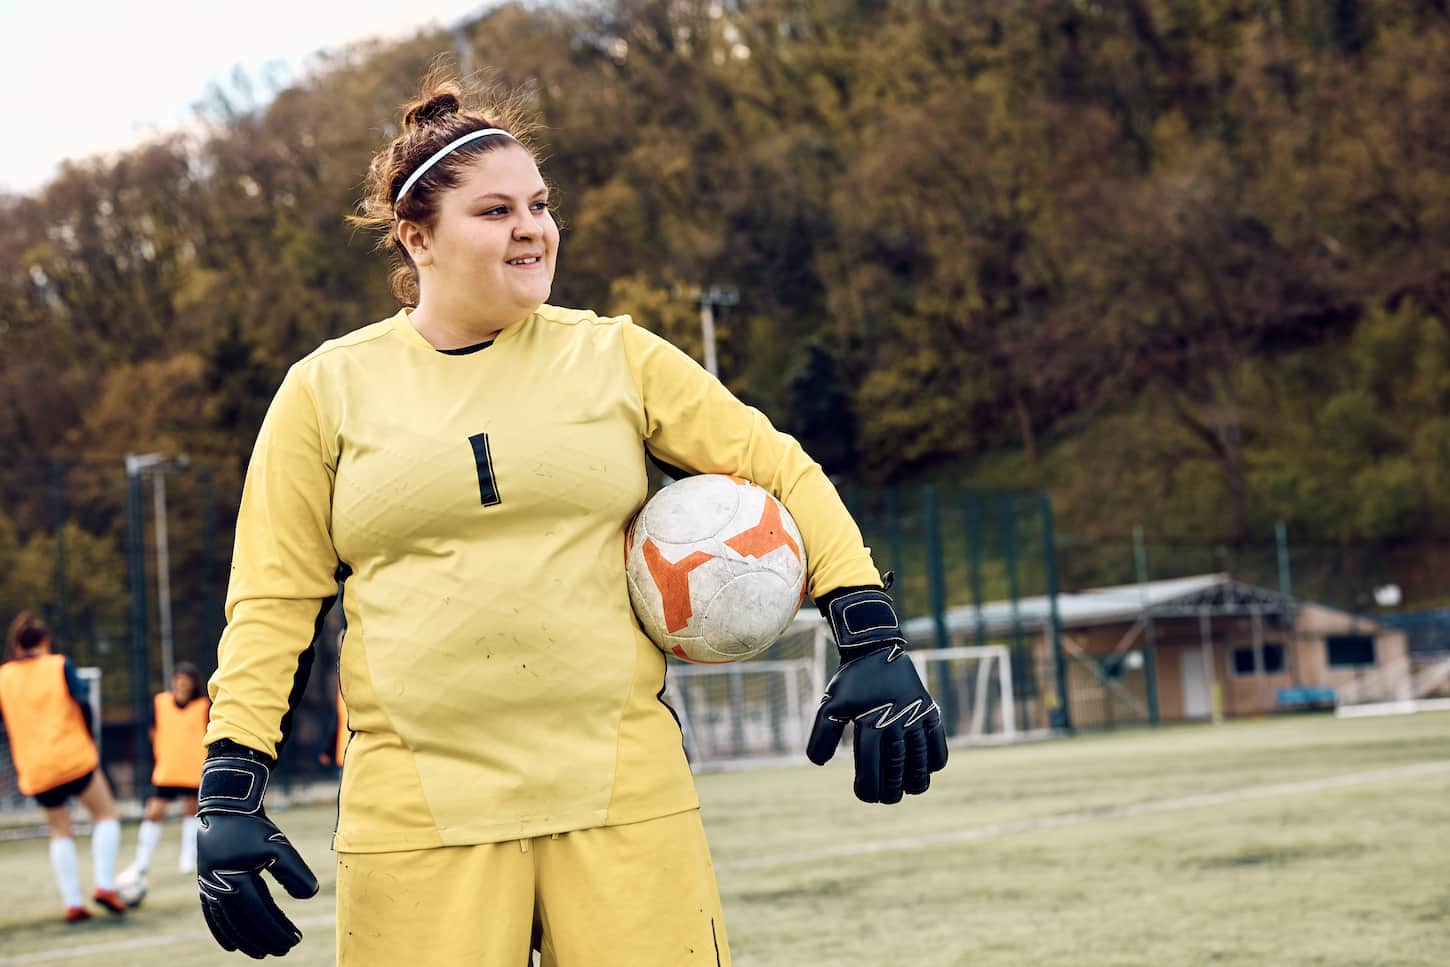 An image of a Female soccer goalie with a ball during sports training at the stadium looking away.